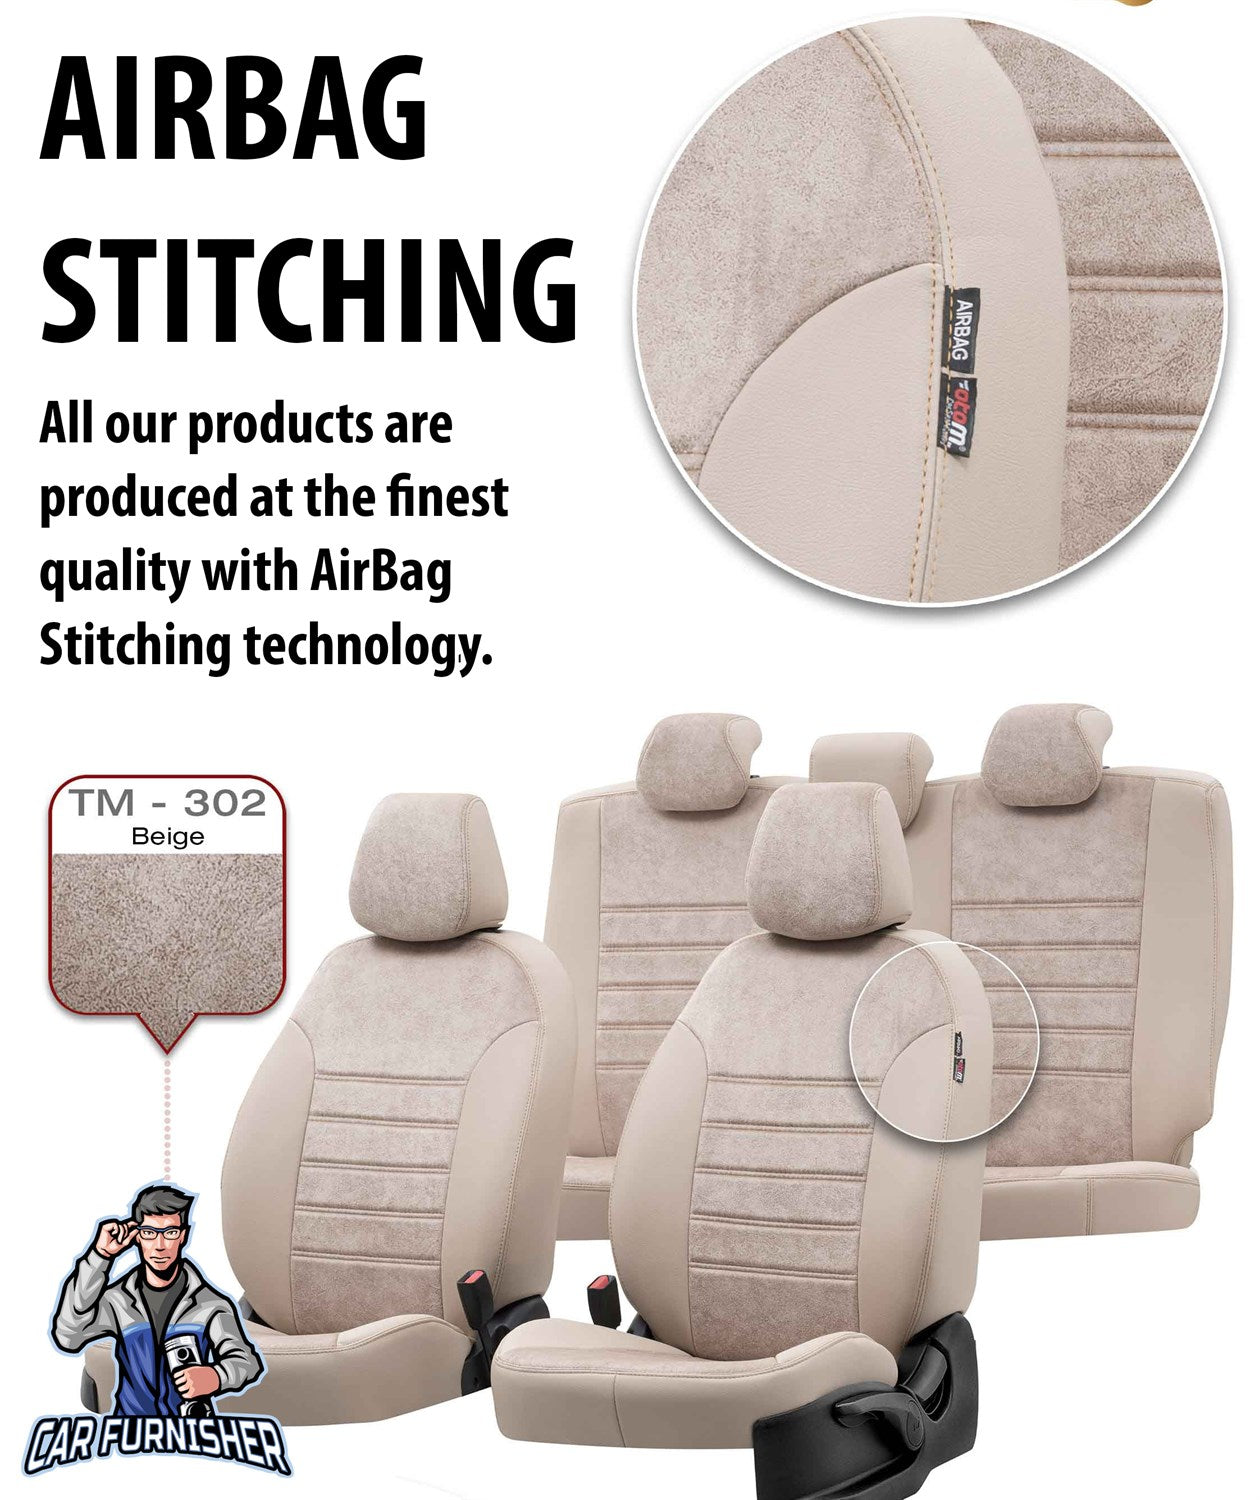 Peugeot 307 Seat Covers Milano Suede Design Smoked Leather & Suede Fabric